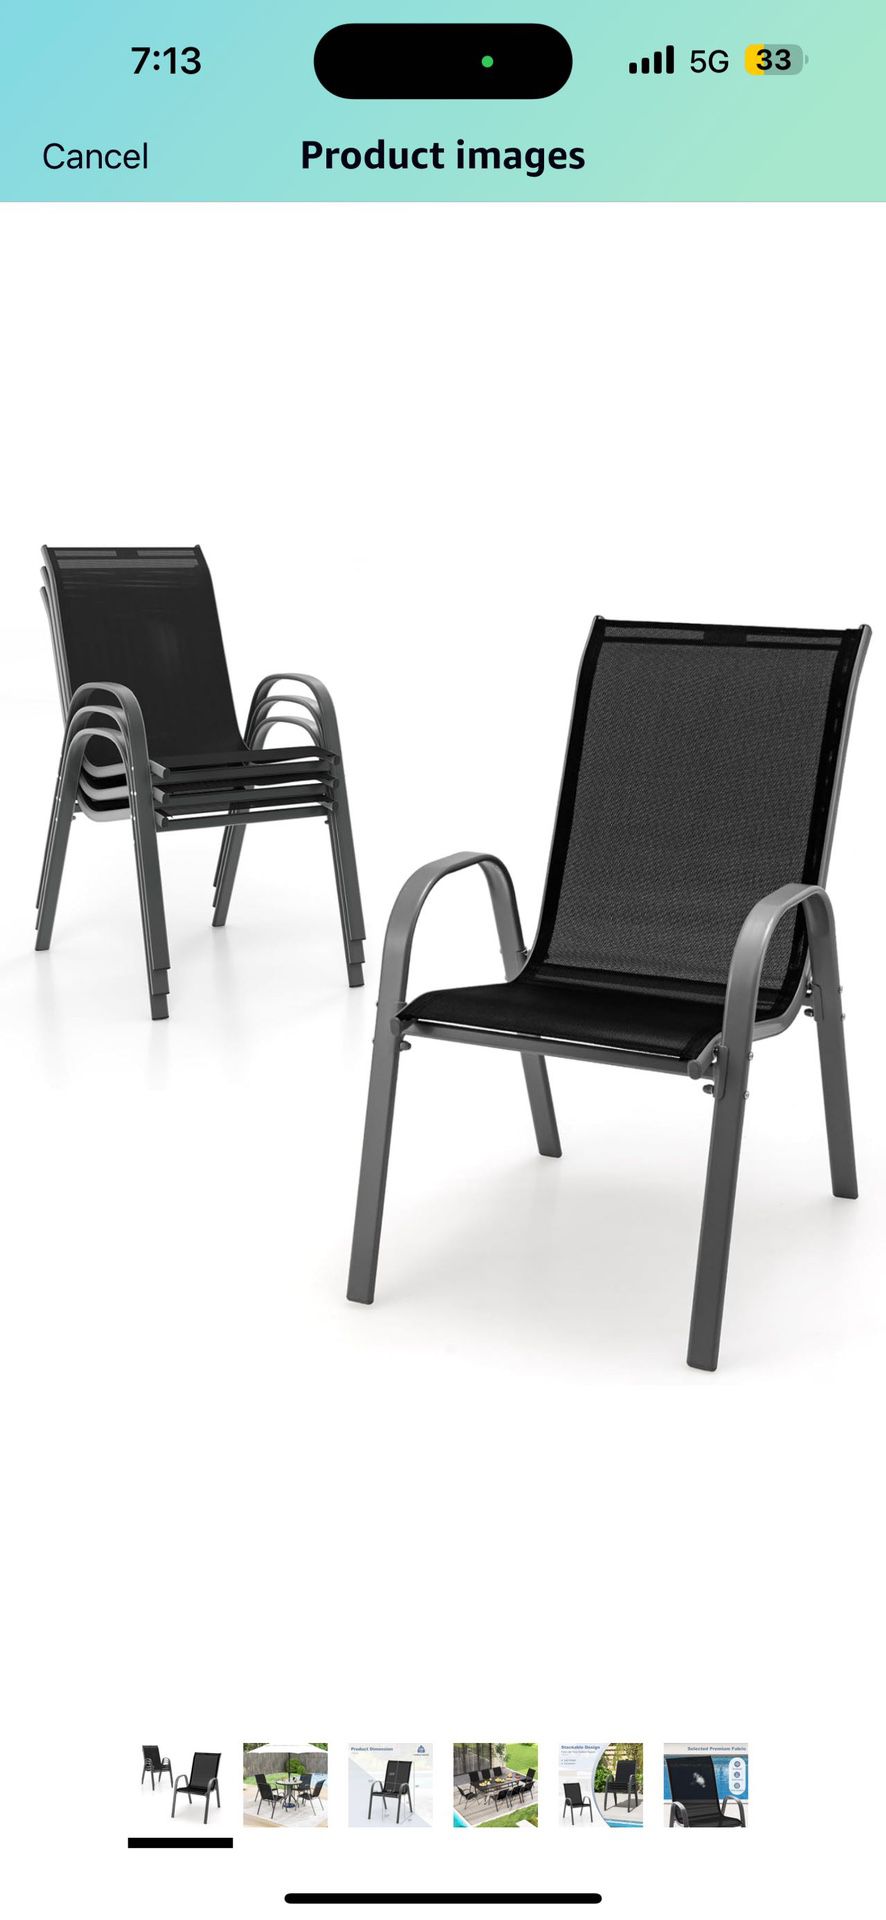 Patio Dining Chairs Set of 4, Stackable Outdoor Chairs with Armrests and Breathable Seat Fabric, Dining Chairs for Patio, Pool Side, Backyard